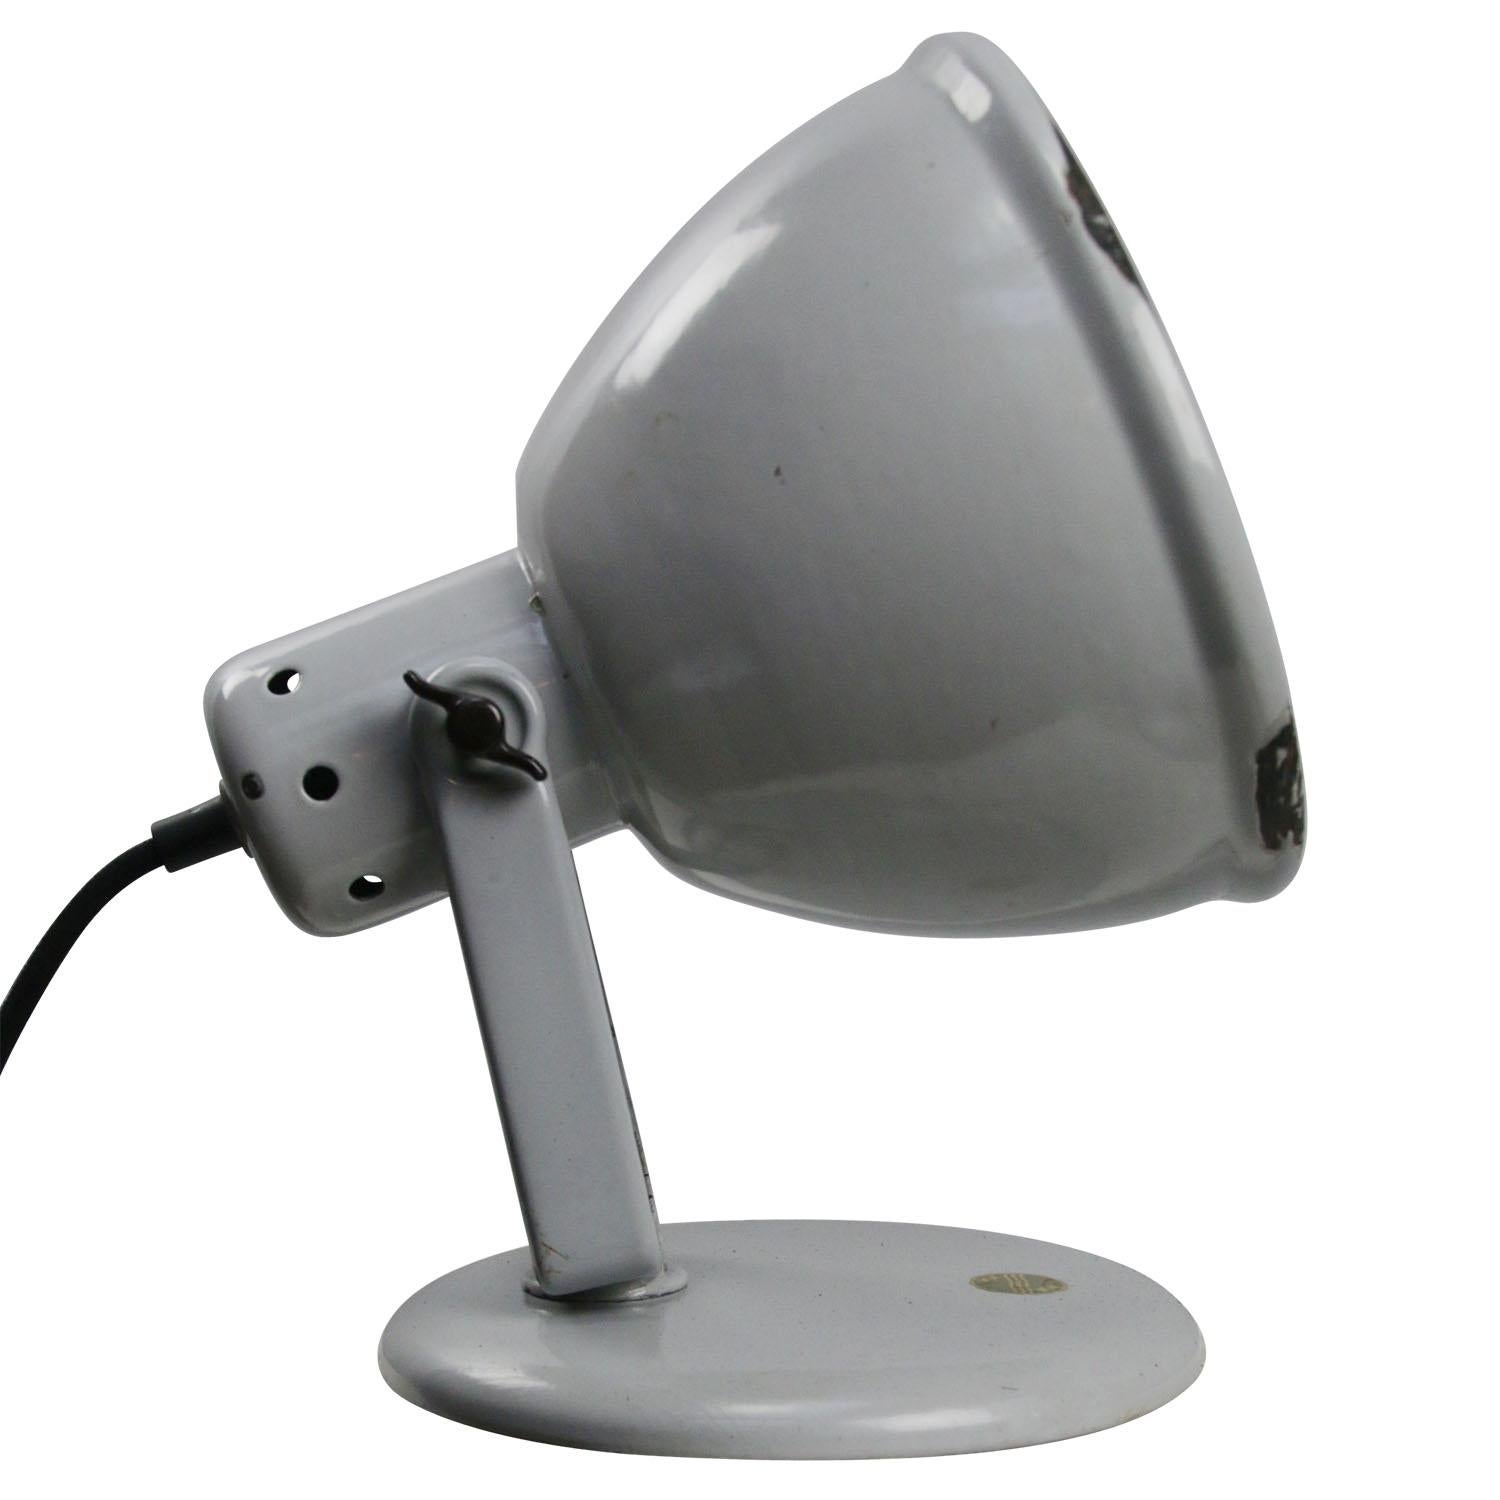 Grey enamel desk light by Philips
2 meter black cotton flex
switch and plug

Weight: 2.60 kg / 5.7 lb

Priced per individual item. All lamps have been made suitable by international standards for incandescent light bulbs, energy-efficient and